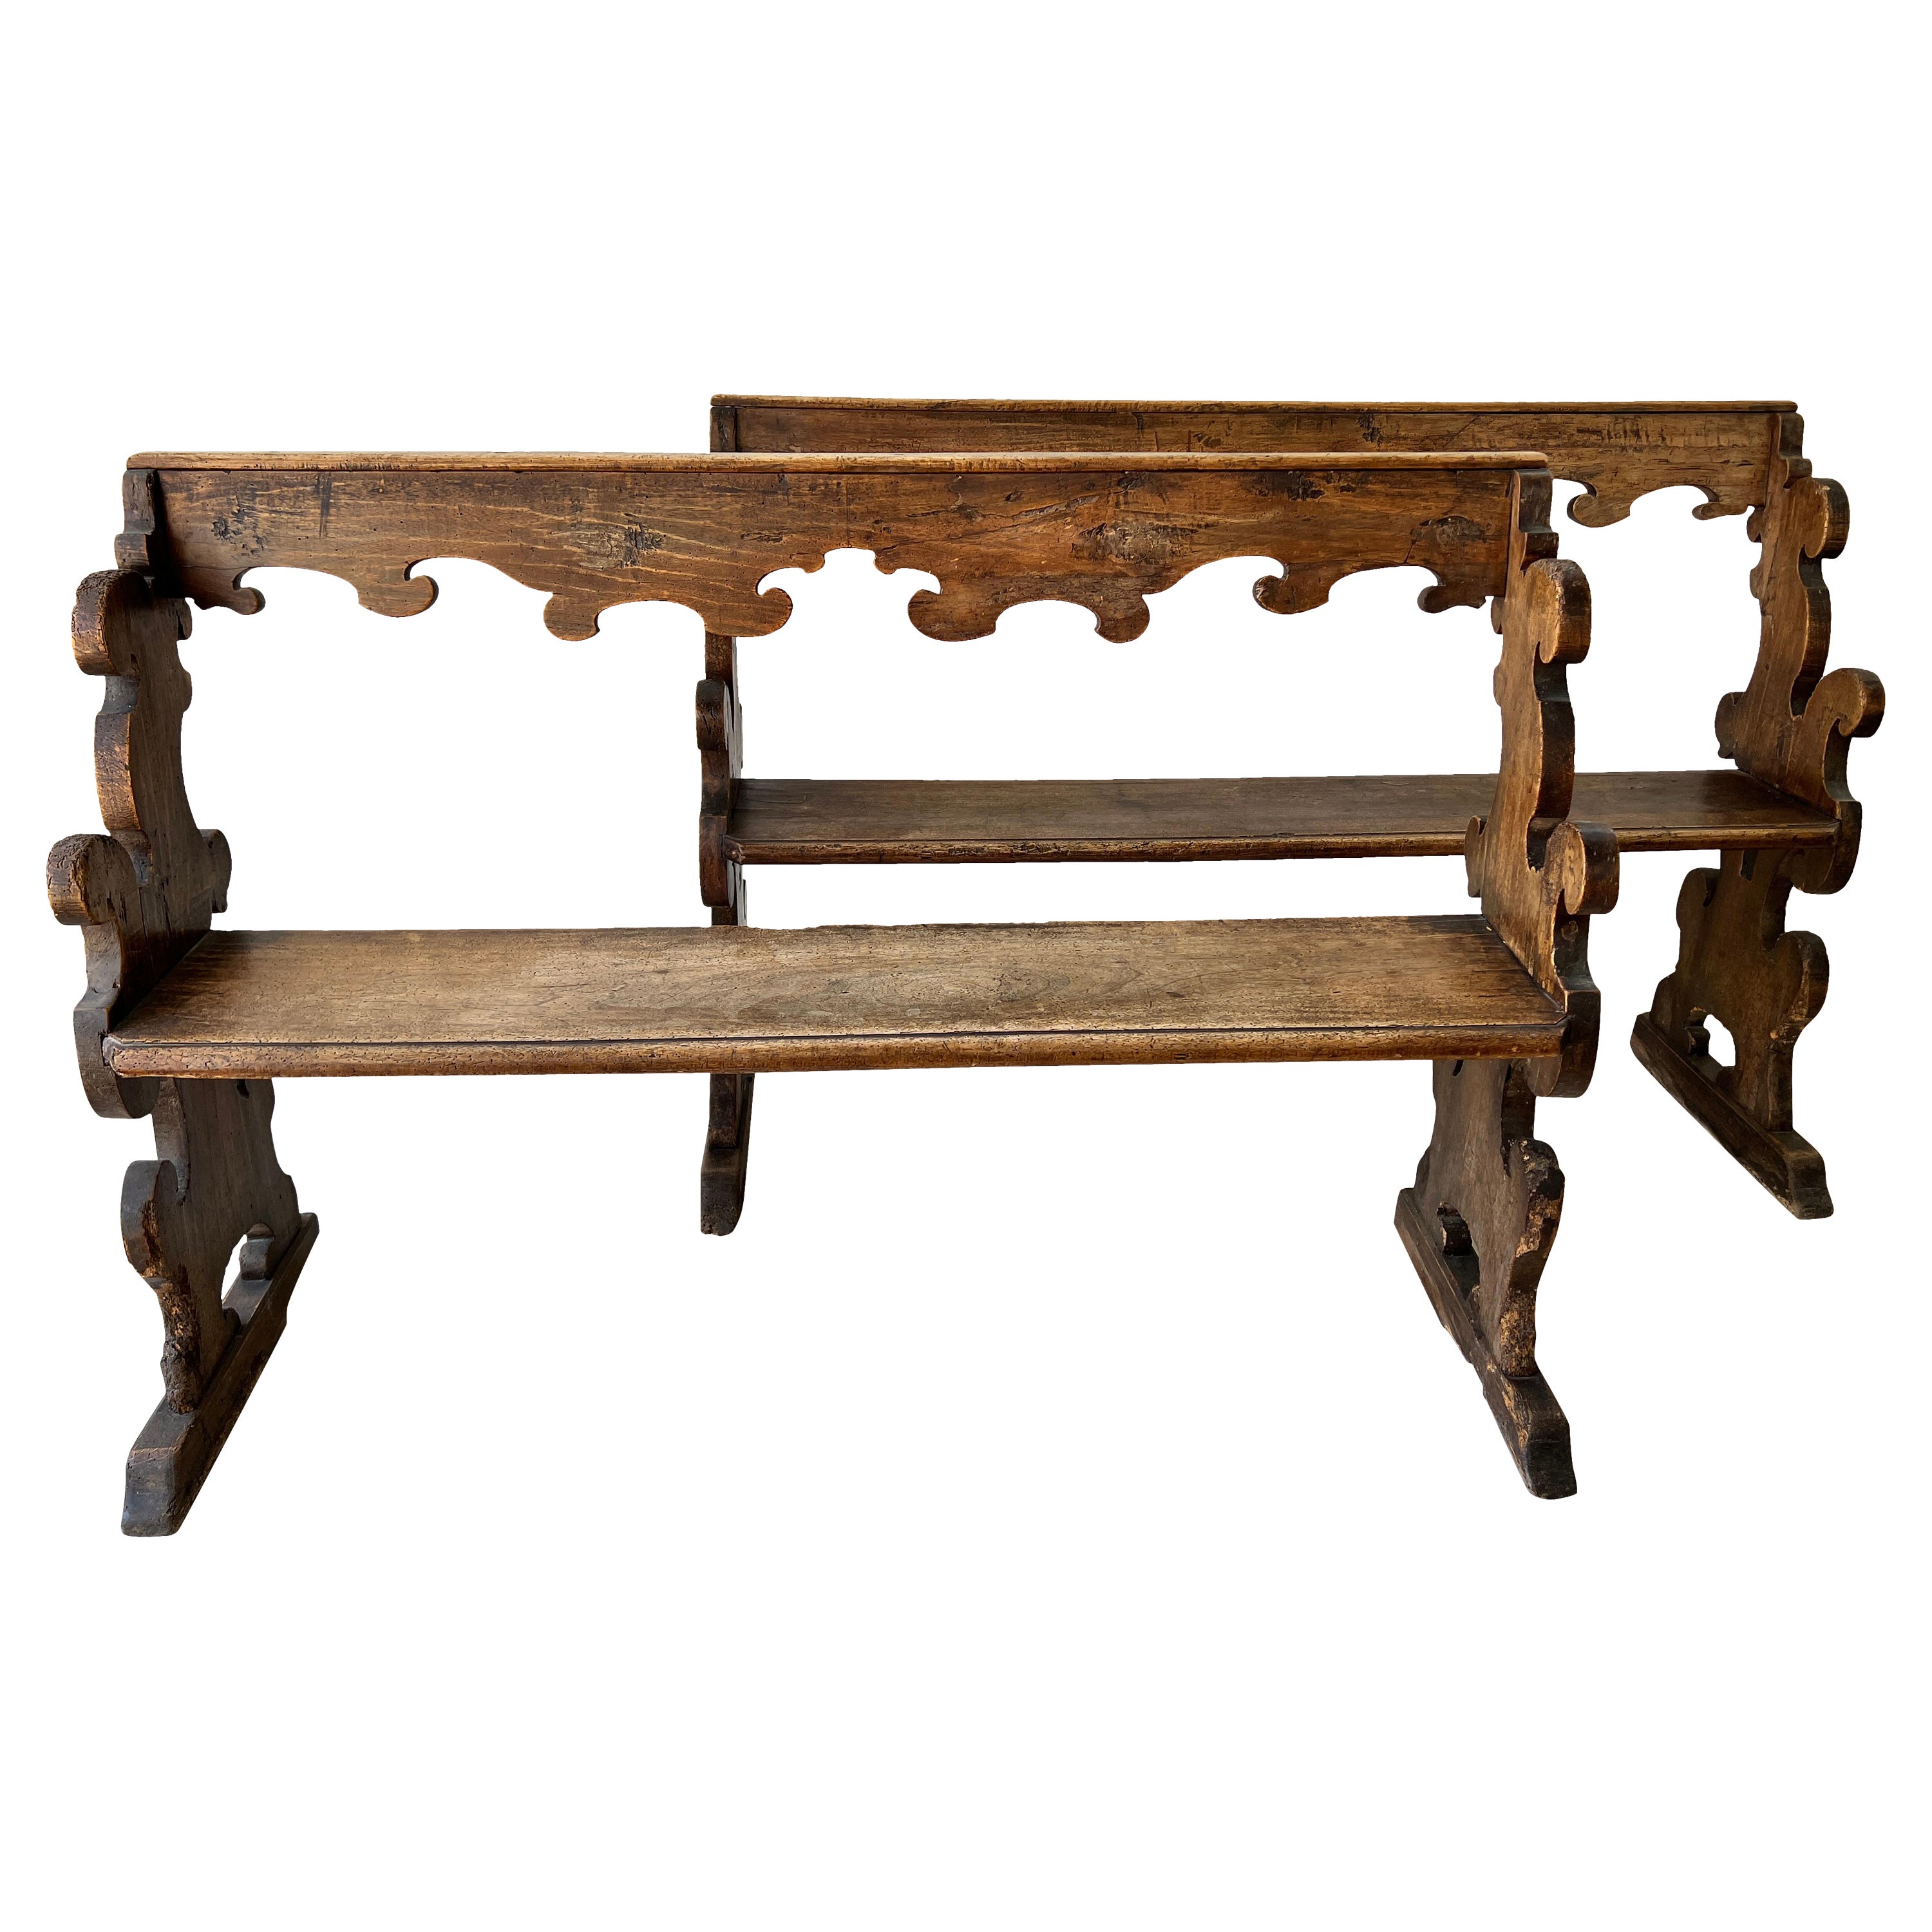 17th century Italian hall benches or pews